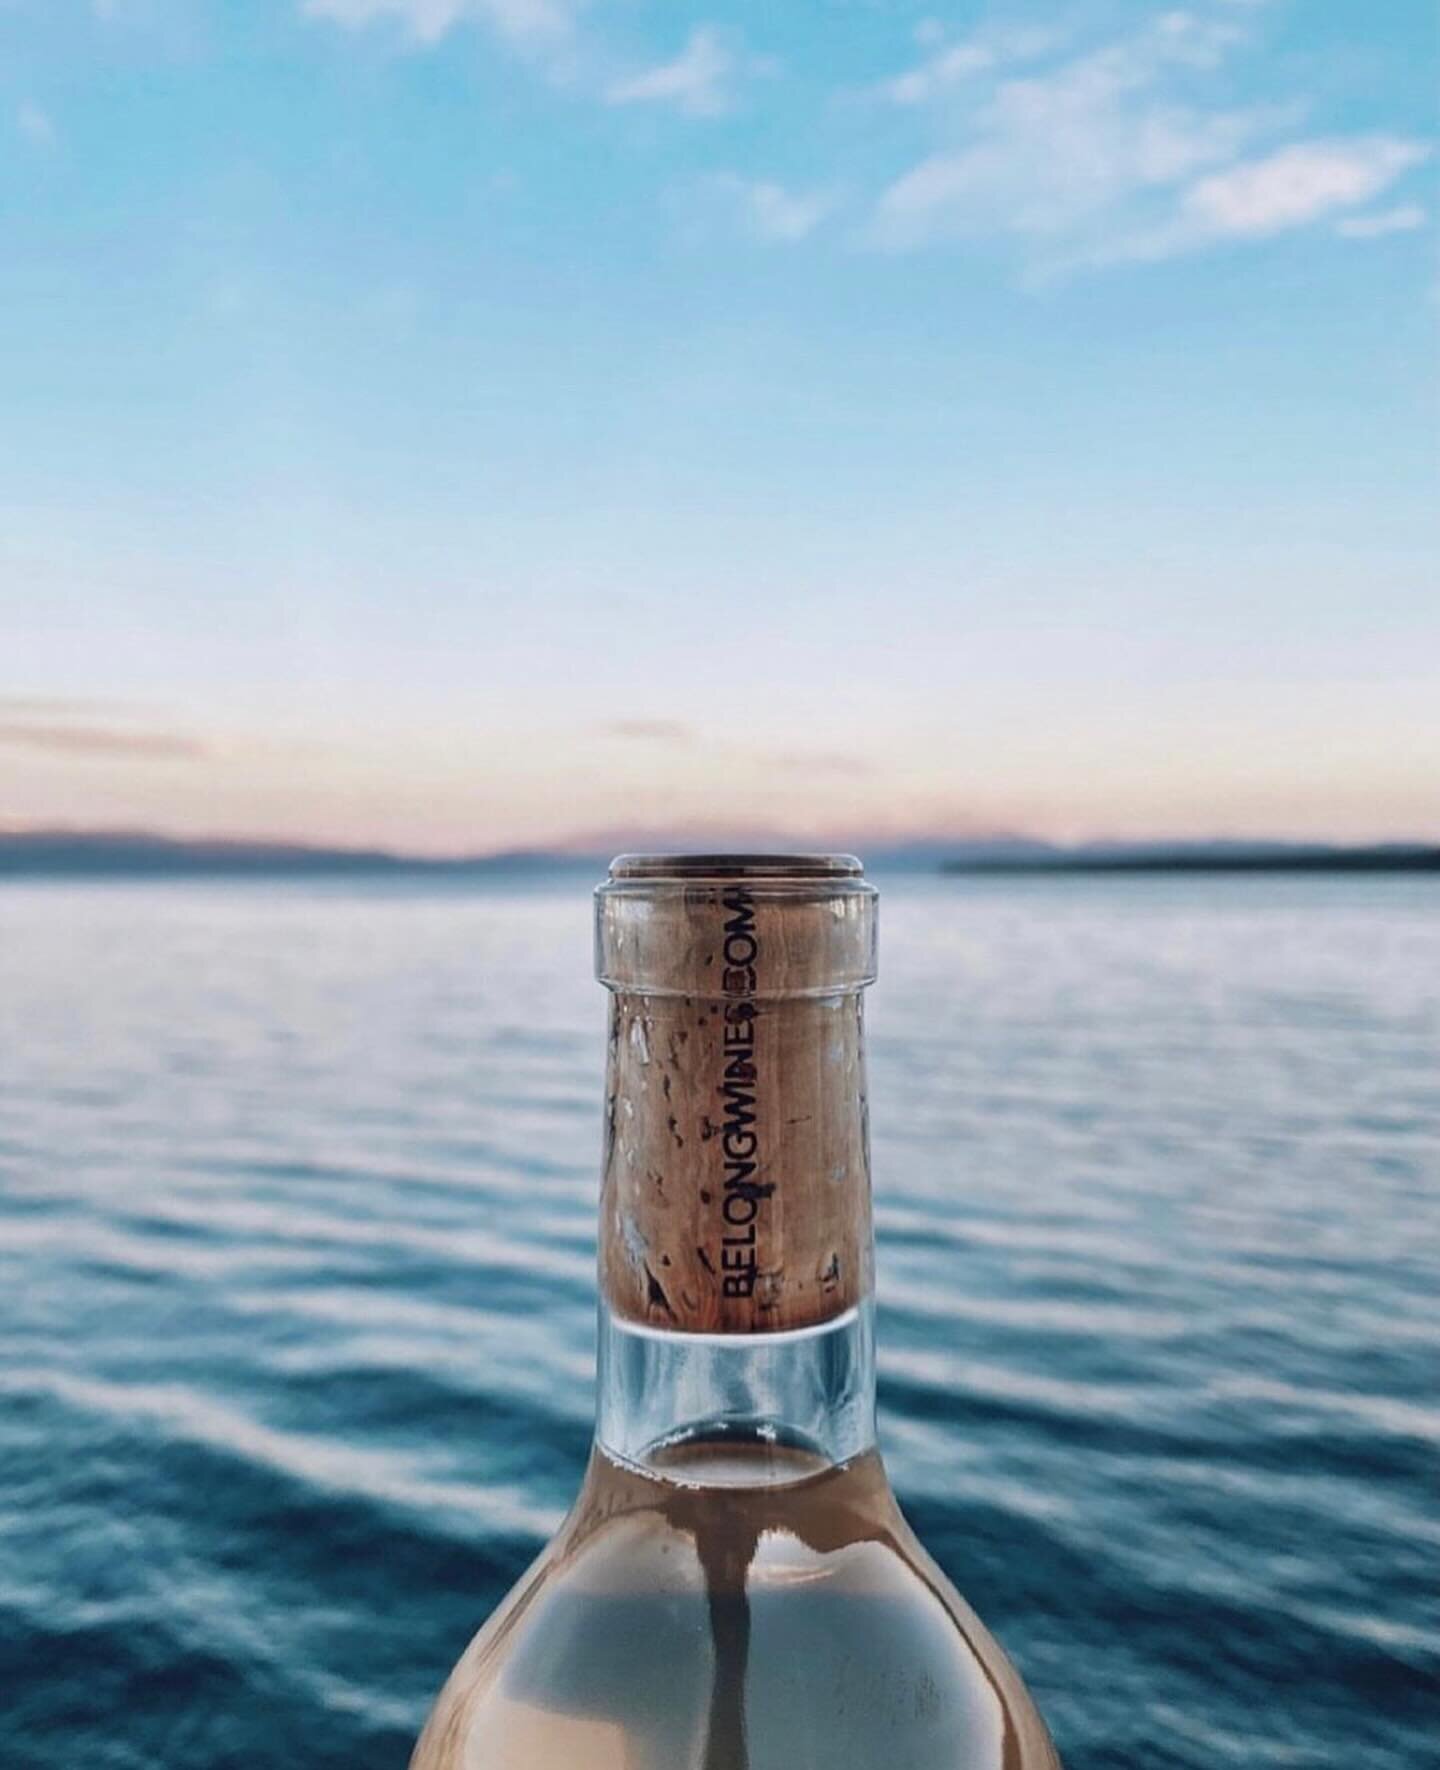 &ldquo;This tastes like today, like the first best day of the year&hellip;&rdquo; (things overheard at the party) 
⠀⠀⠀⠀⠀⠀⠀⠀⠀
Pour yourself a glass of joy with our &lsquo;Chasing the Sunset&rsquo; ros&eacute; 🌅
⠀⠀⠀⠀⠀⠀⠀⠀⠀
#FollowTheSun
.
.
.
#BelongWi